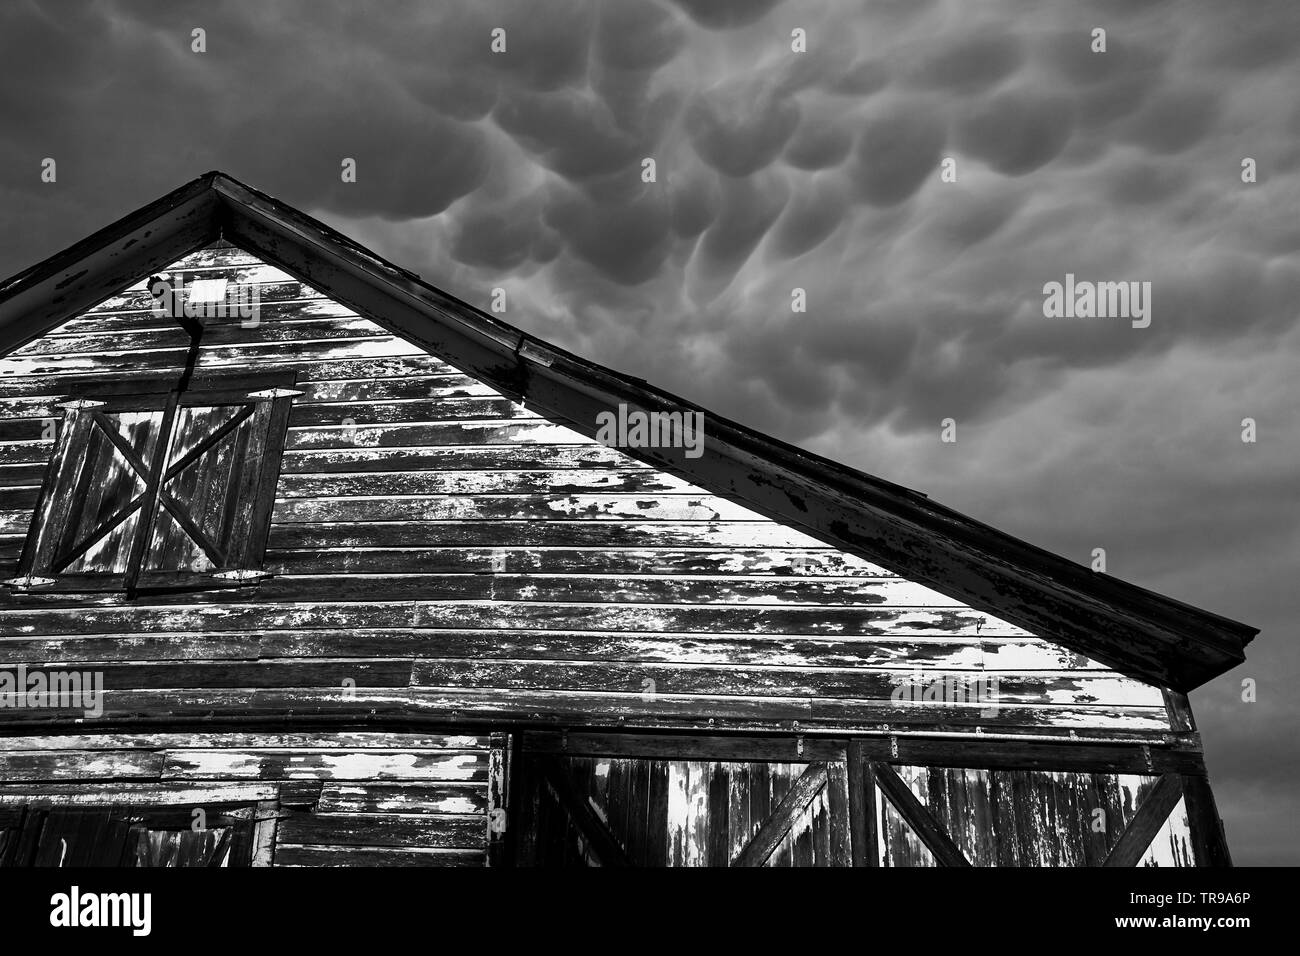 An old and weathered barn under strange mammatus storm clouds in late May outside Healdsburg and Windsor, Sonoma County, California. Stock Photo